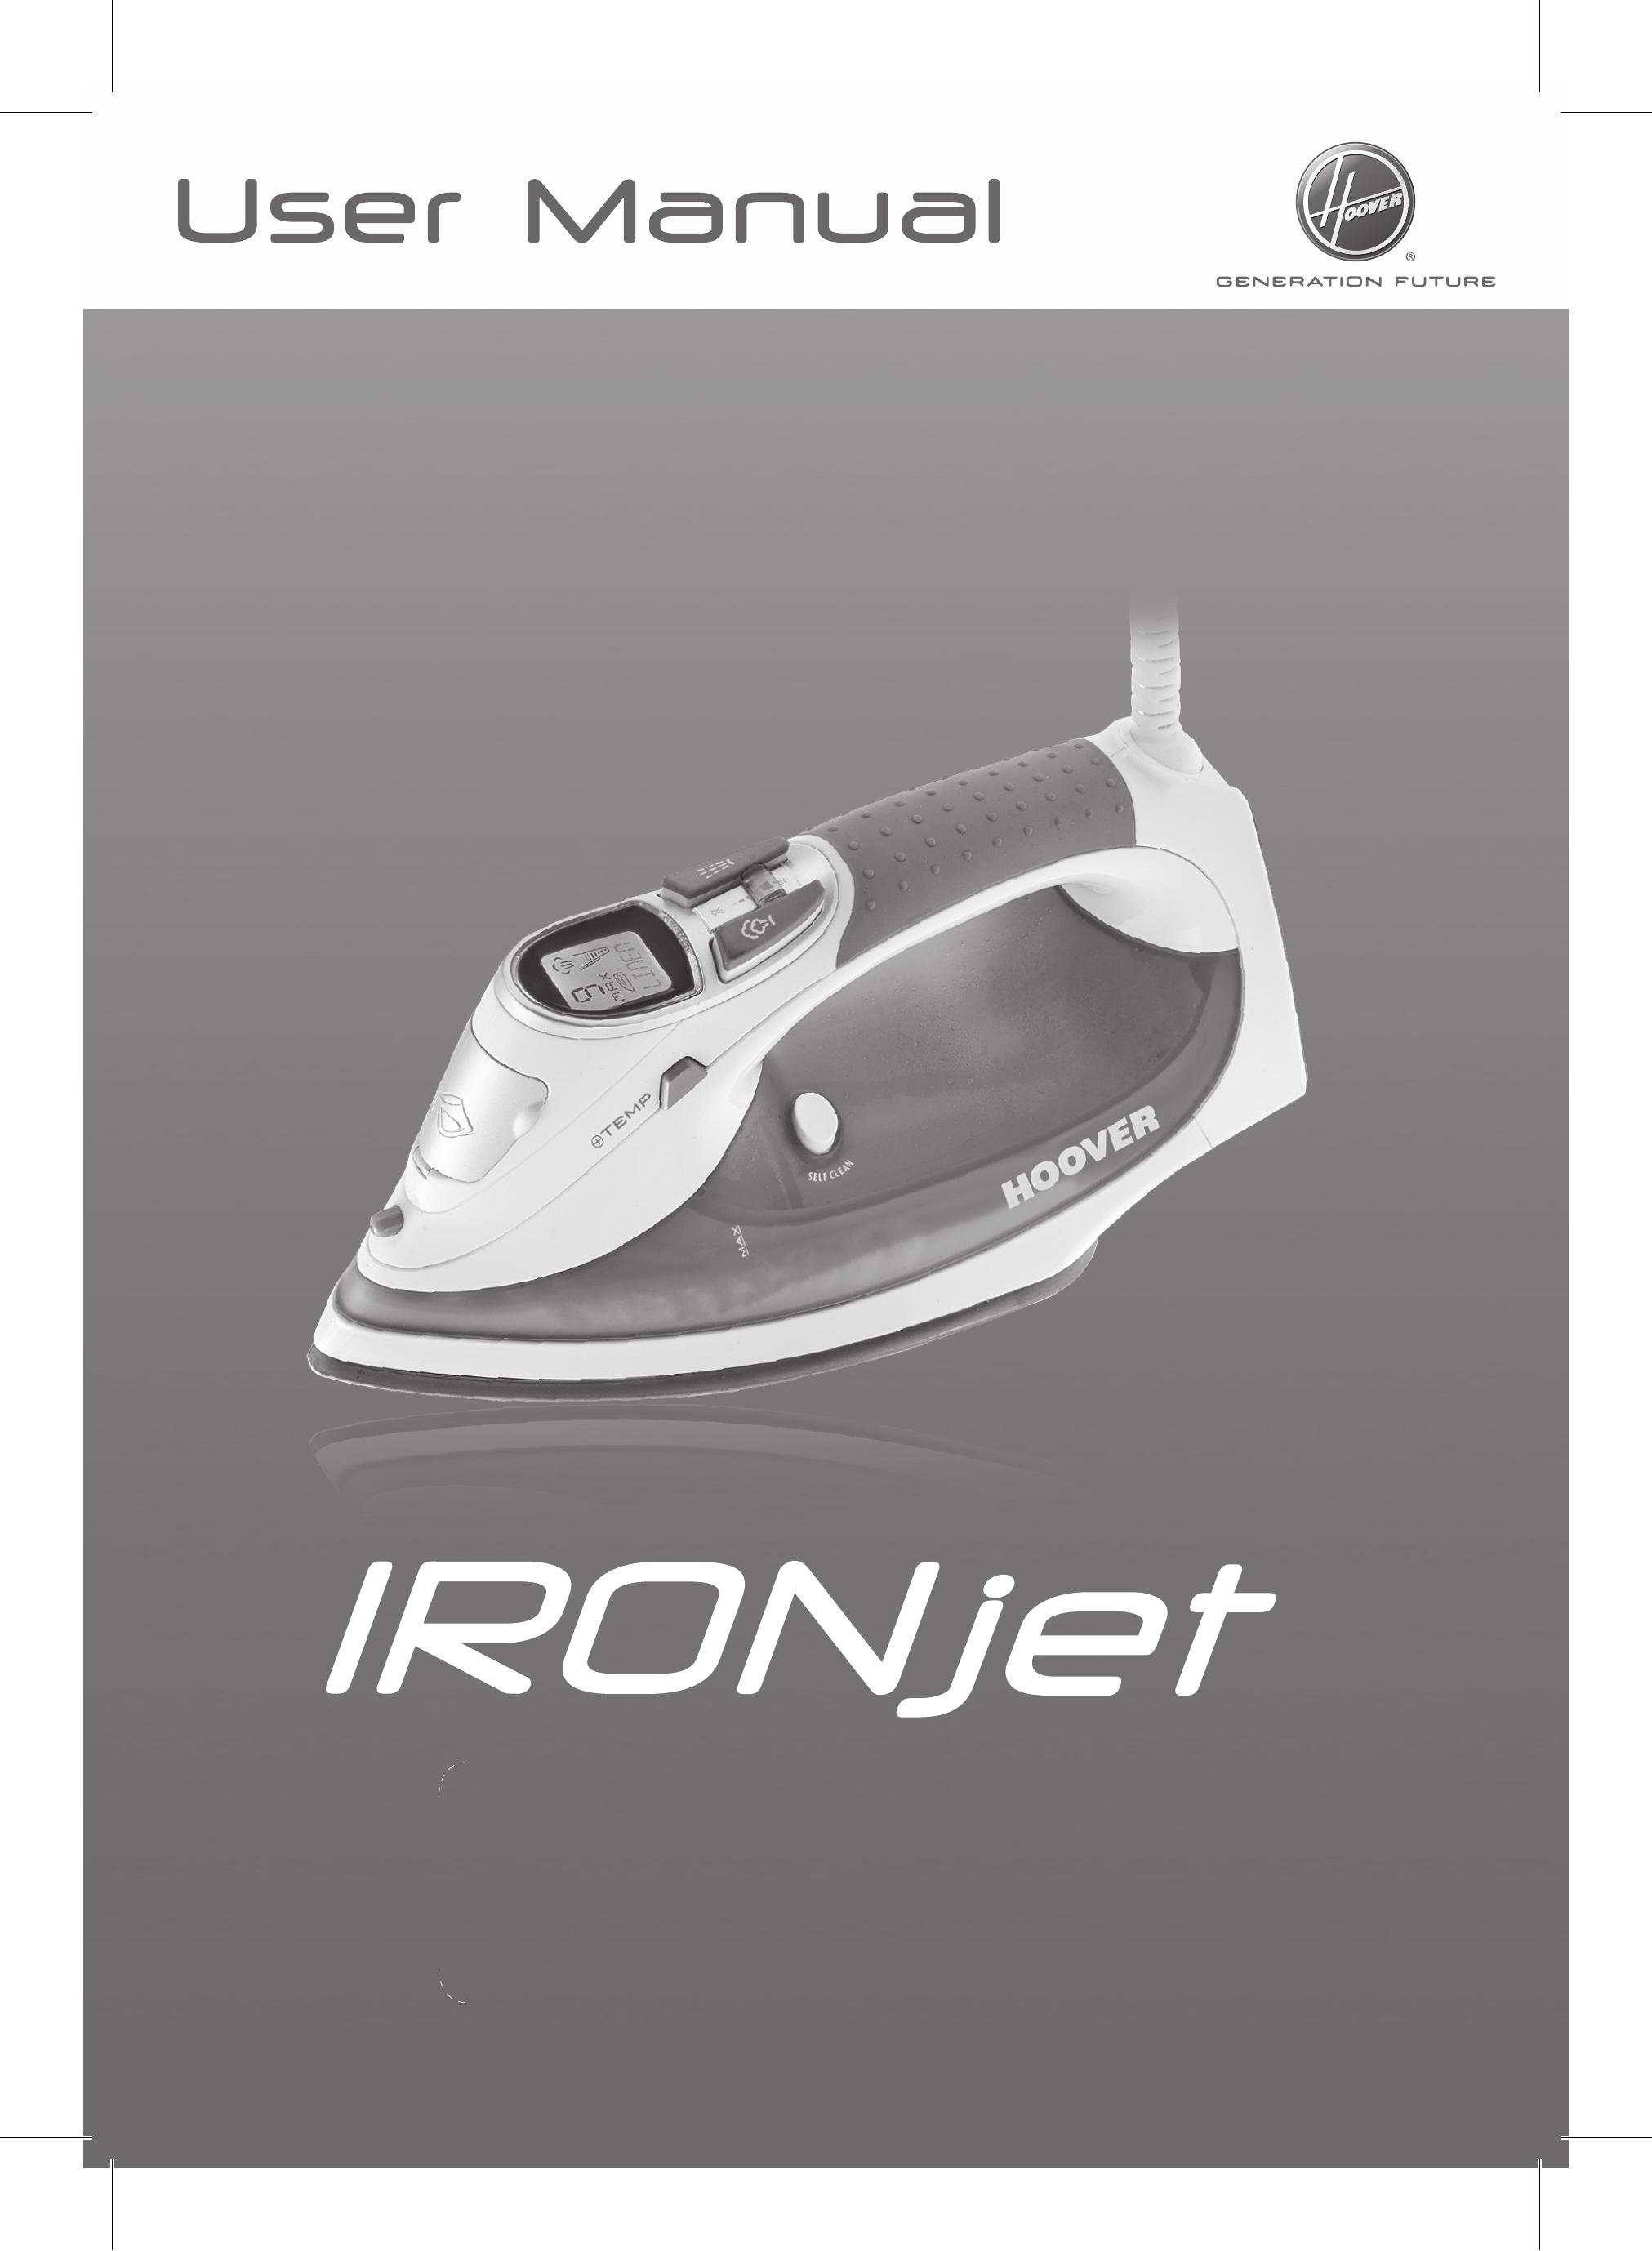 Hoover 48011051 Iron User Manual